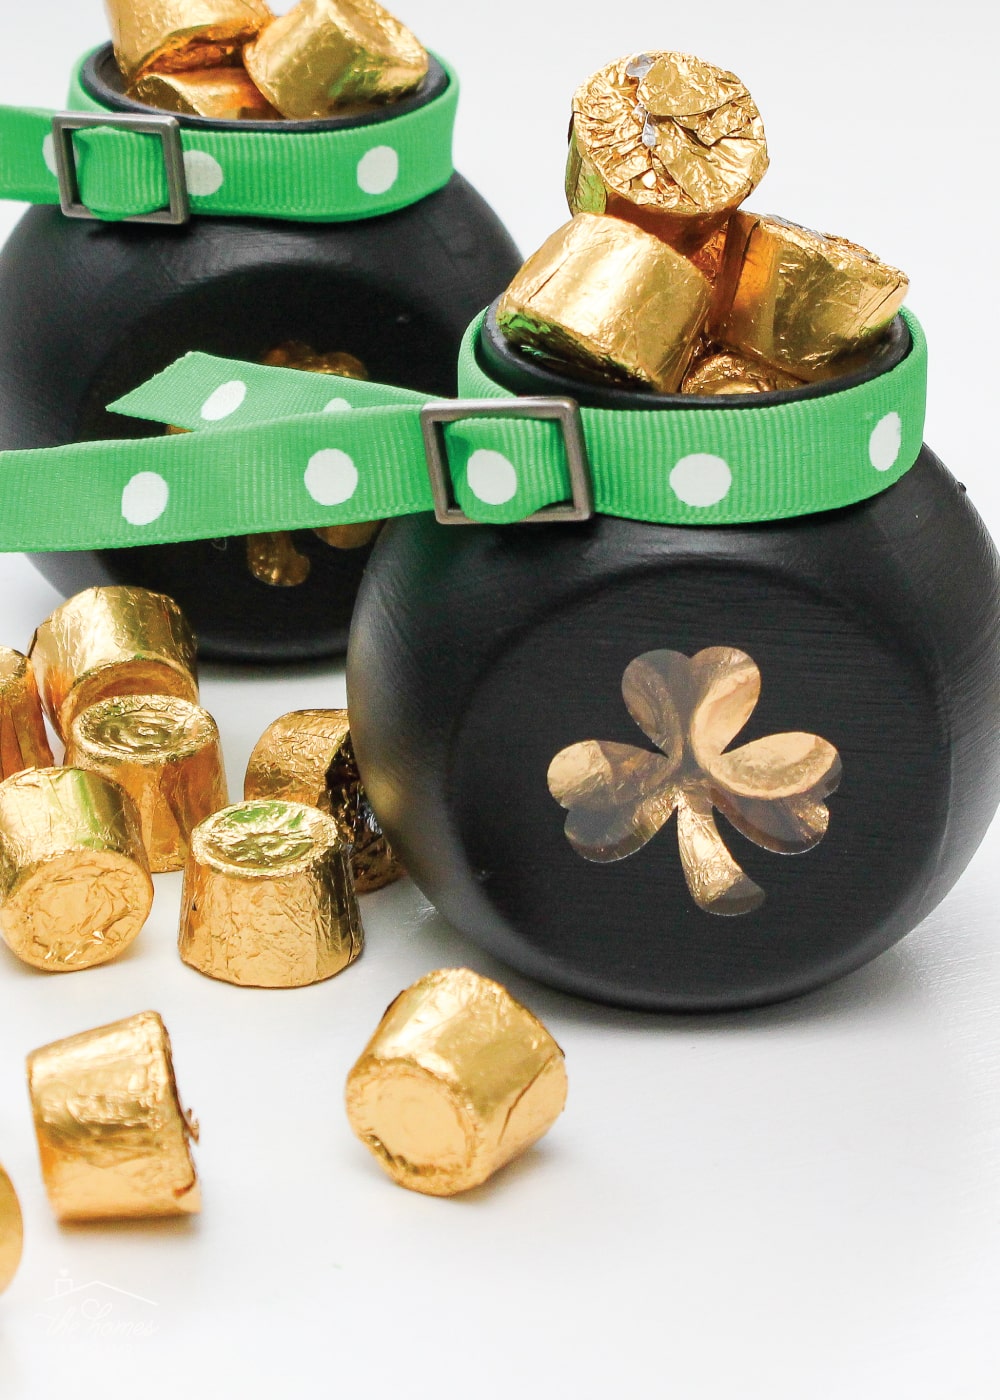 https://thehomesihavemade.com/wp-content/uploads/2021/03/Pot-of-Gold-Candy-Jars_Title_No-Text.jpg